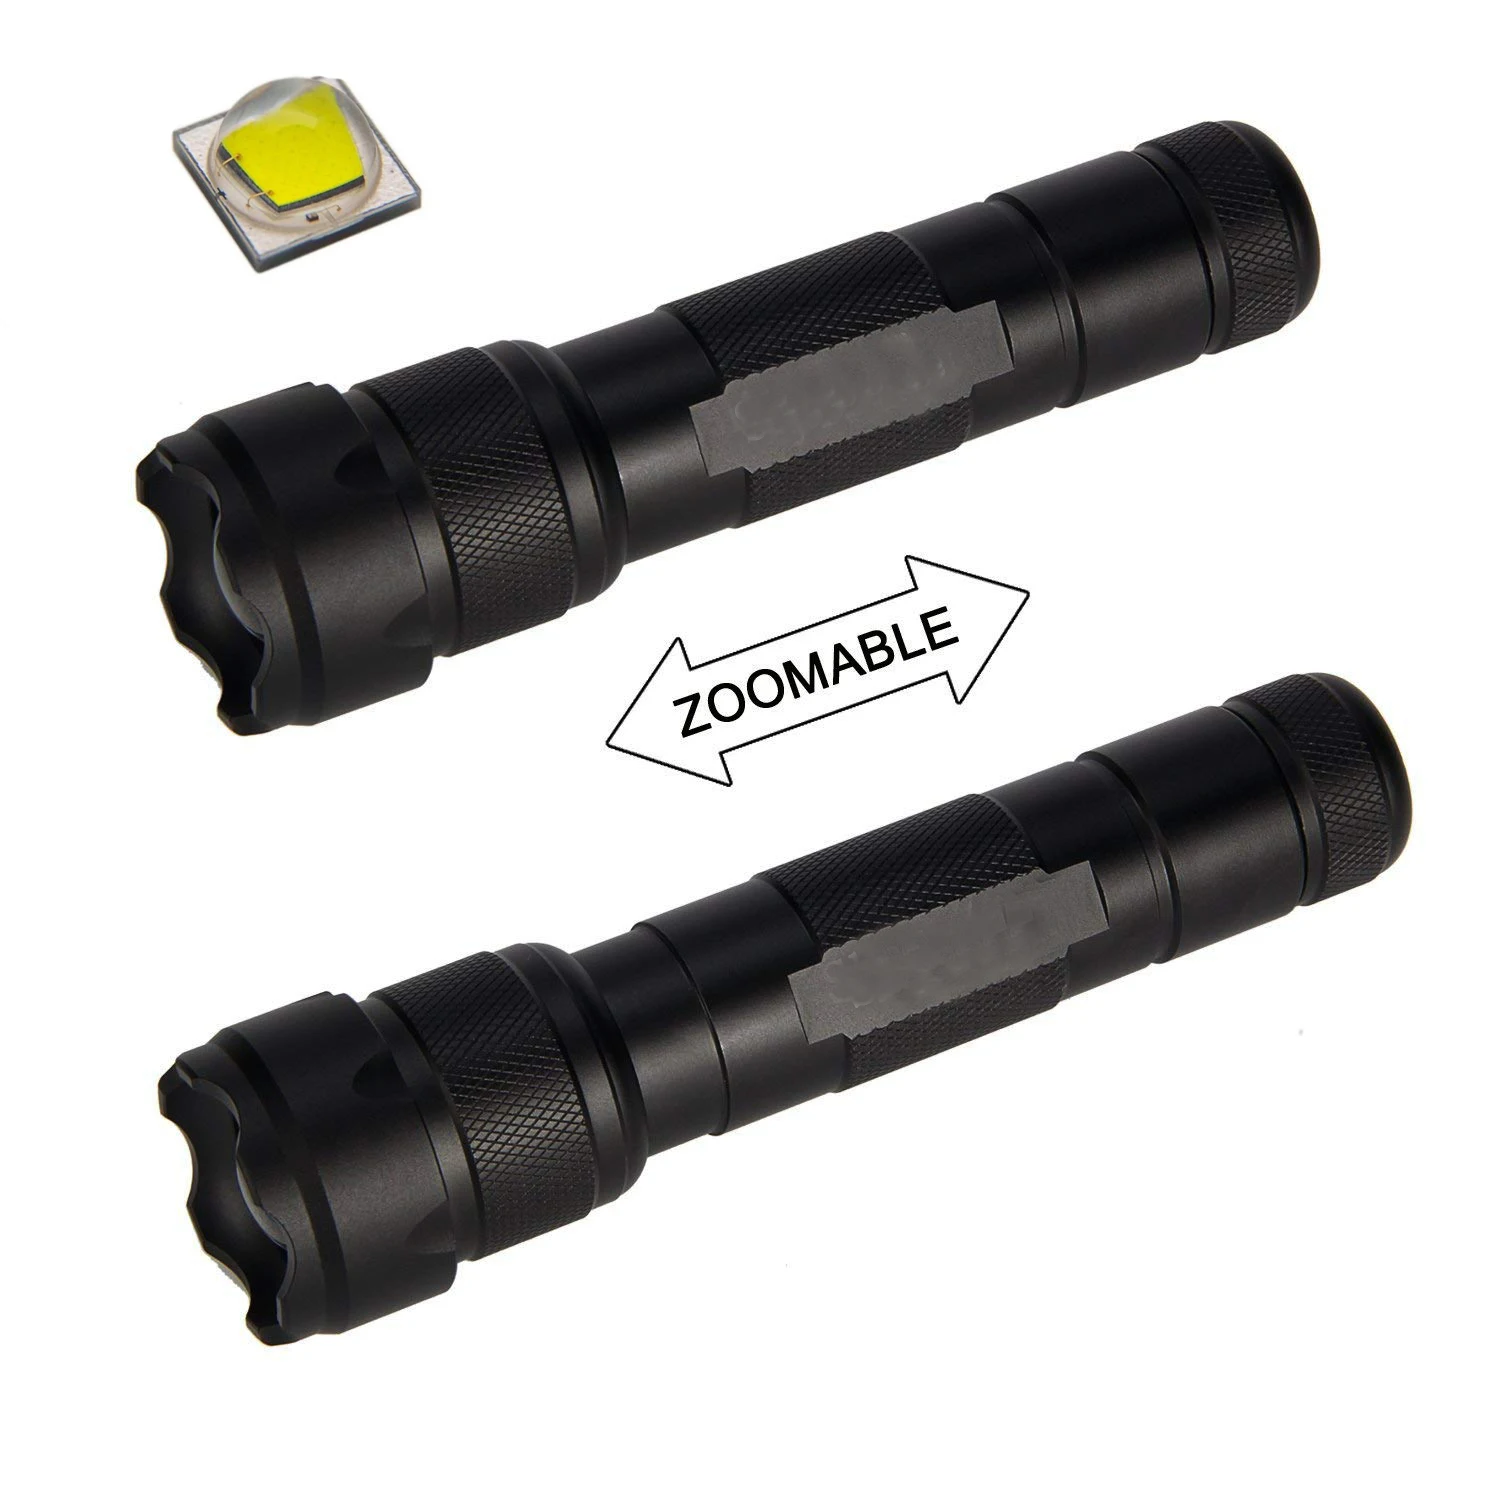 

Skysted 502B Single Mode Zoomable 800 Lumens 10W XM-L2 U3 LED Cool White LED 18650 Camping Flashlight Outdoor Torch